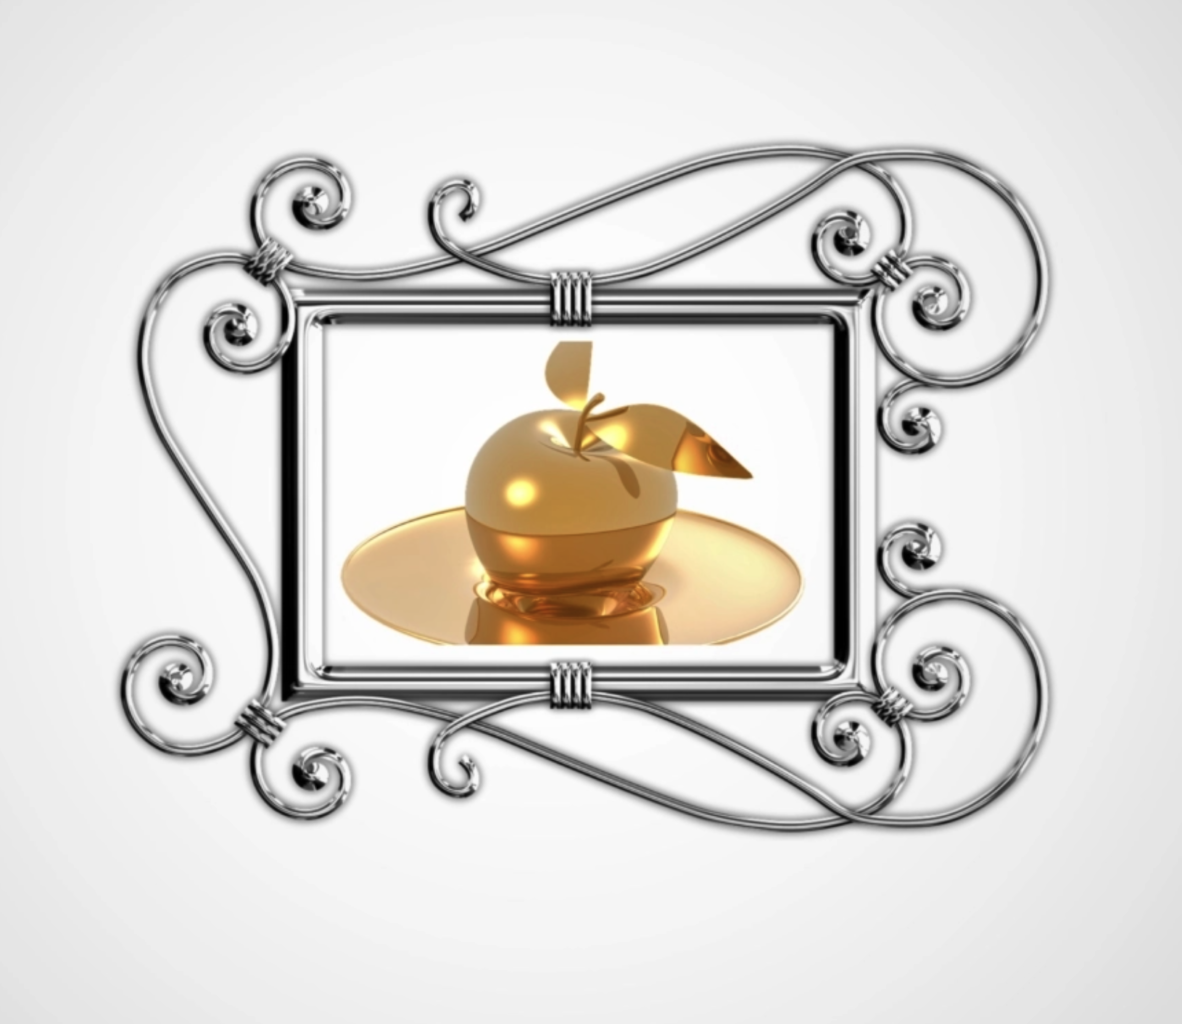 silver frame gold apple 1182x1024 - Democracy is the Silver Frame Upon Which the Golden Apple of Democracy Rests